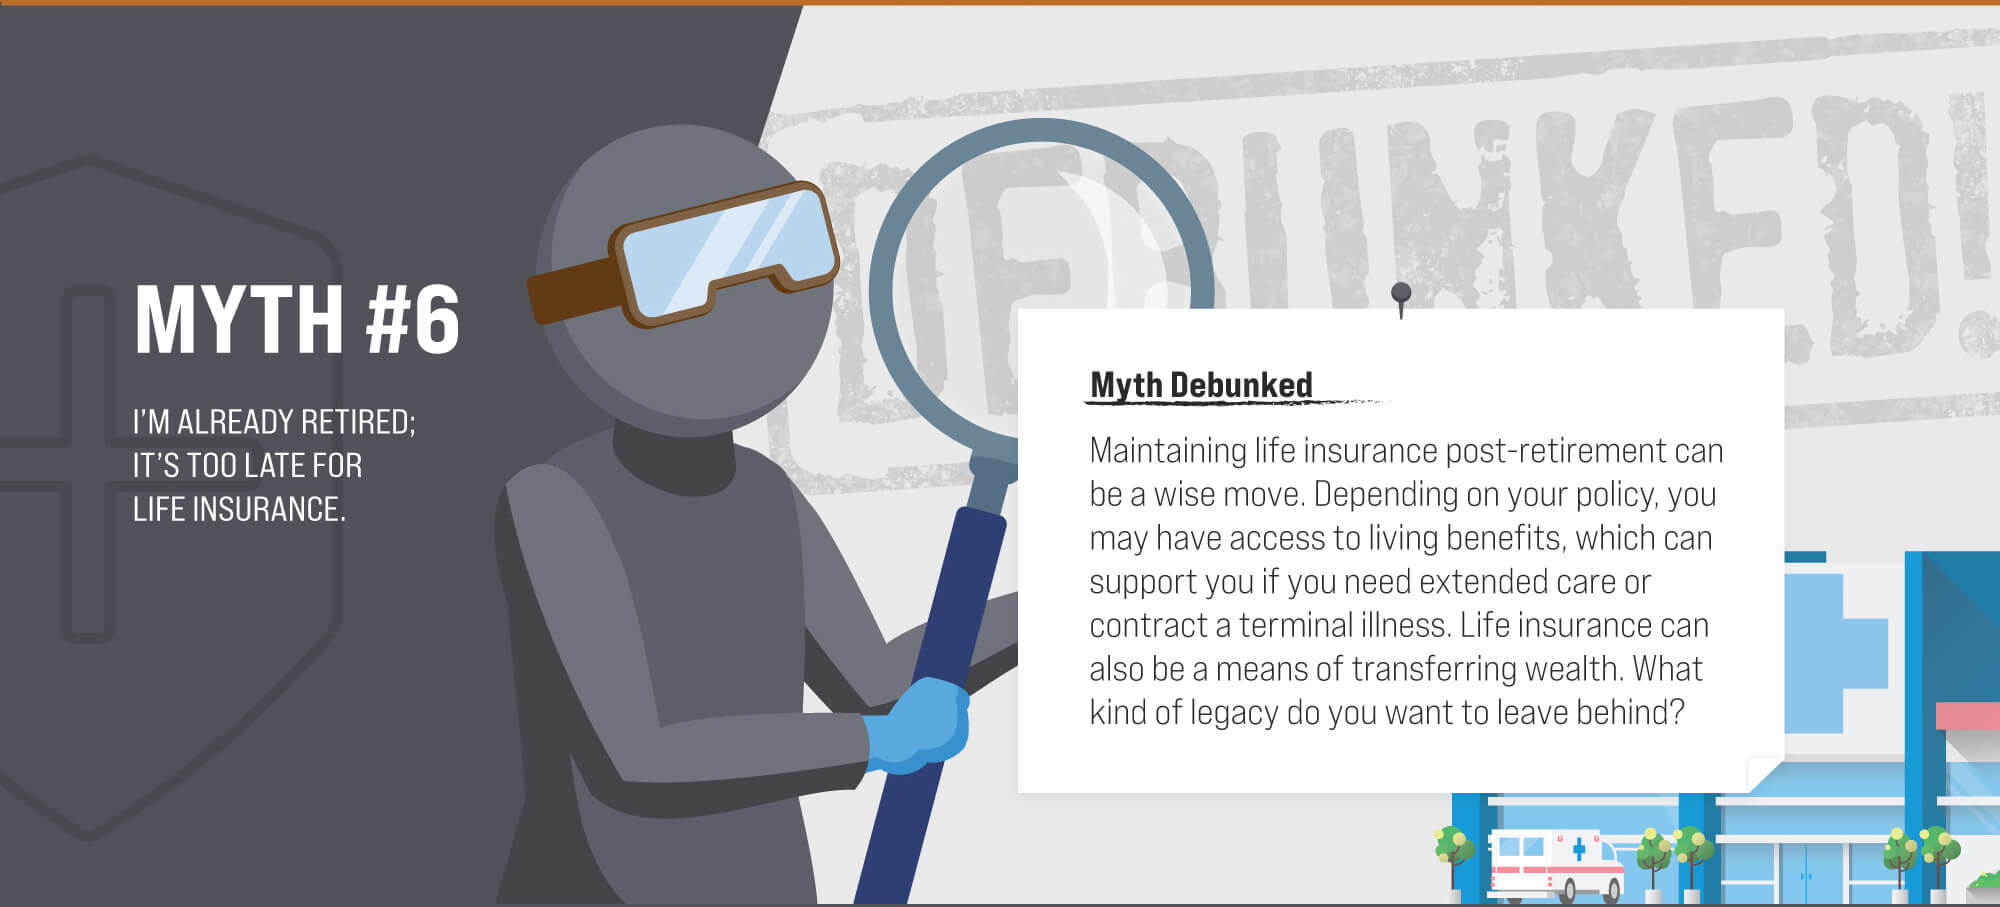 Myth #6: I’m already retired; it’s too late for life insurance. Myth Debunked. Maintaining life insurance post-retirement can be a wise move. Depending on your policy, you may have access to living benefits, which can support you if you need extended care or contract a terminal illness. Life insurance can also be a means of transferring wealth. What kind of legacy do you want to leave behind? (6)